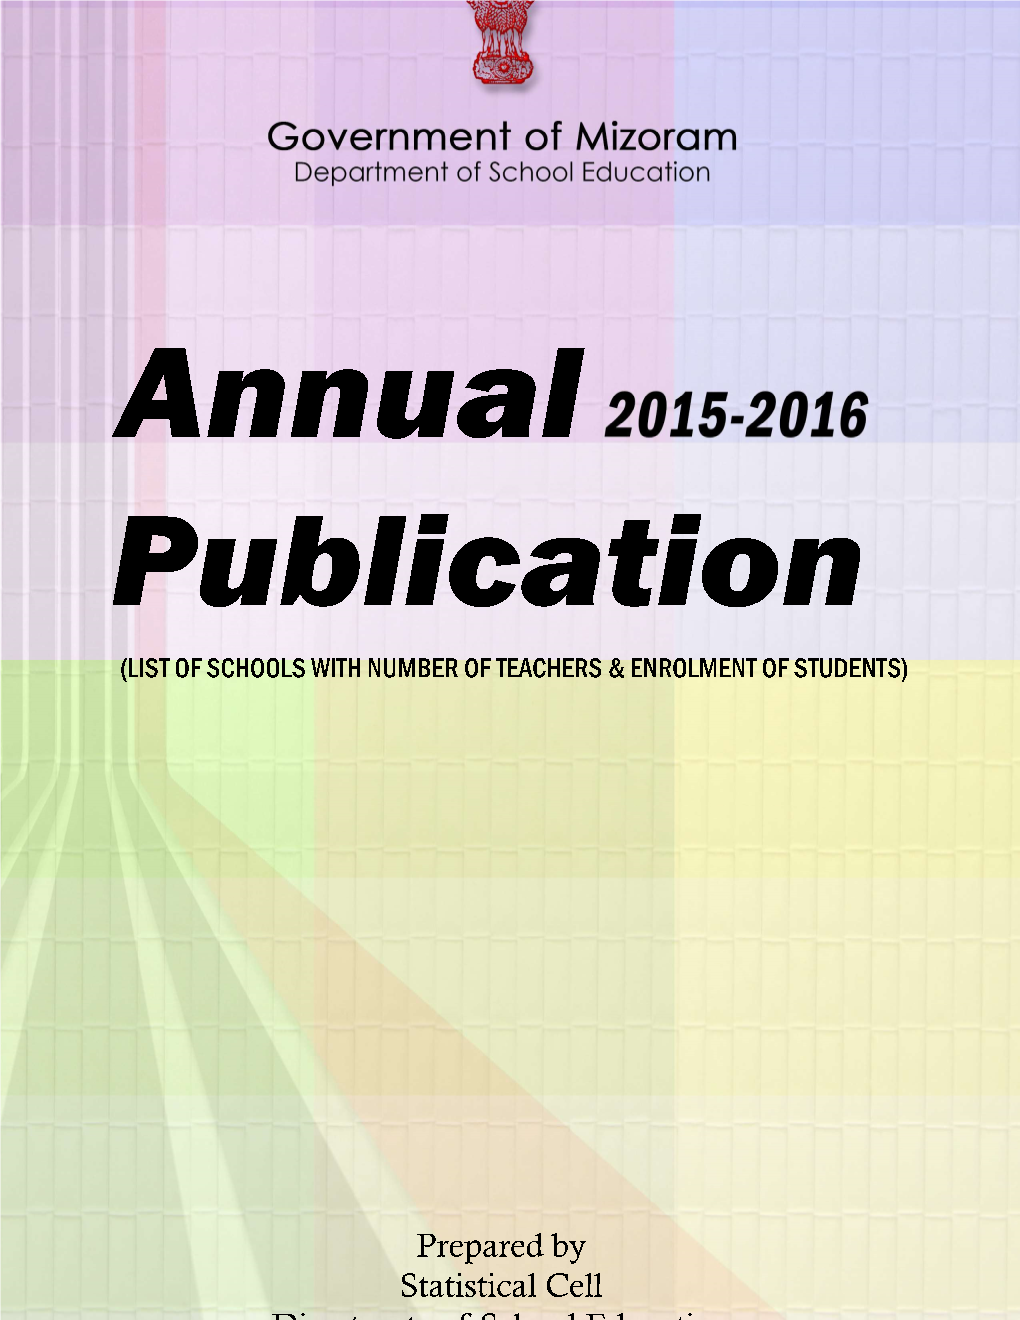 Annual Publication 2015-2016-List of Schools with Number of Teachers